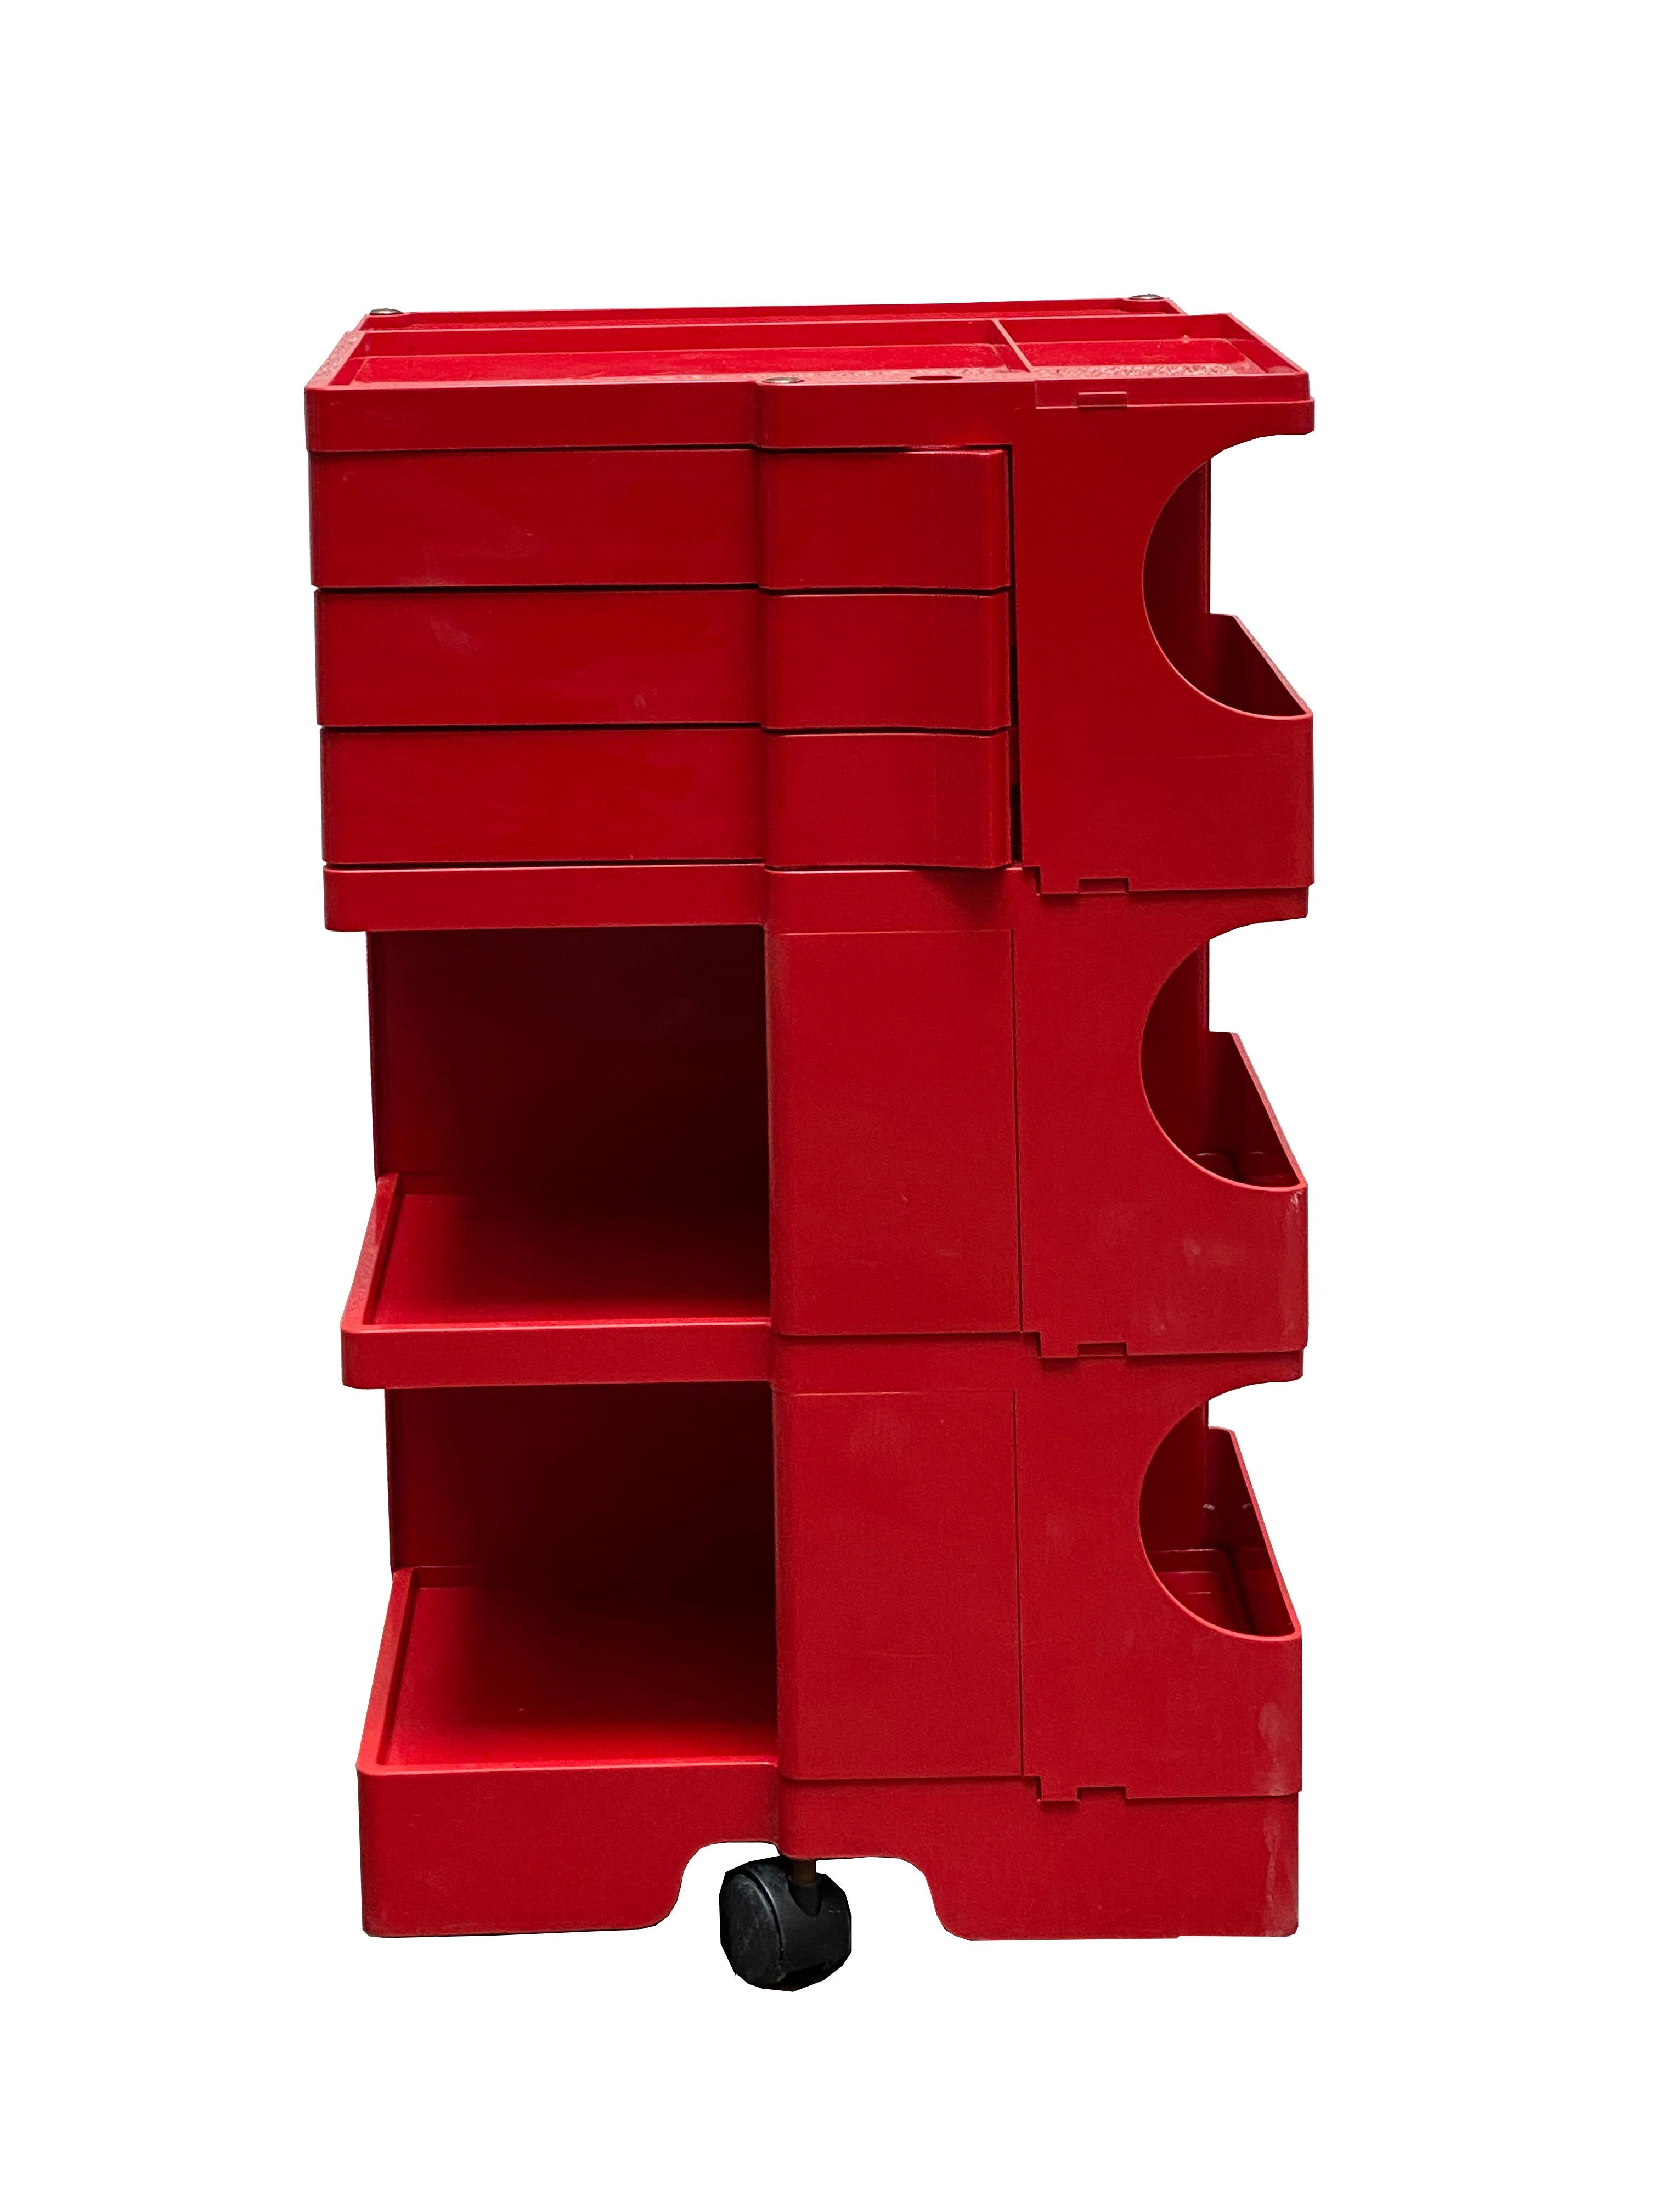 This “Boby” trolley or portable storage system was designed by Joe Colombo in 1969. It is still in production (B-line) and has always been very popular. A very handy trolley made of ABS plastic. It has many storage options such as the fold-out